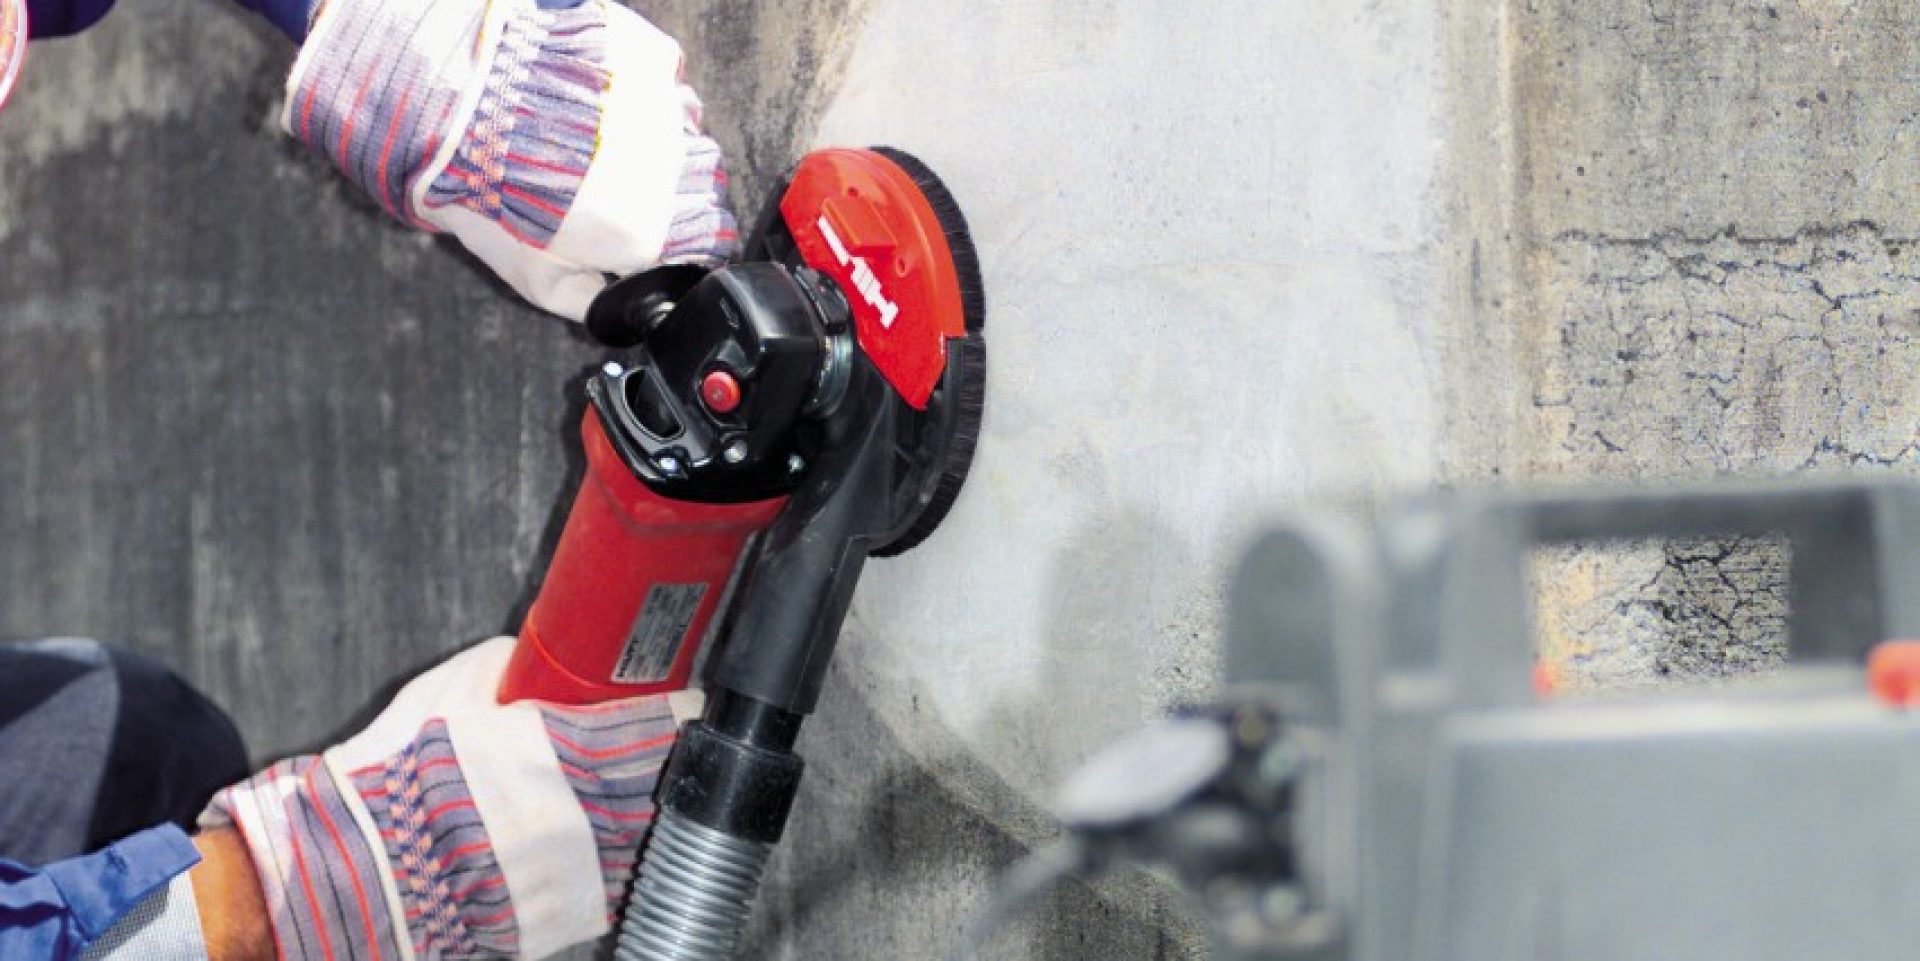 Wall concrete grinding with angle grinder